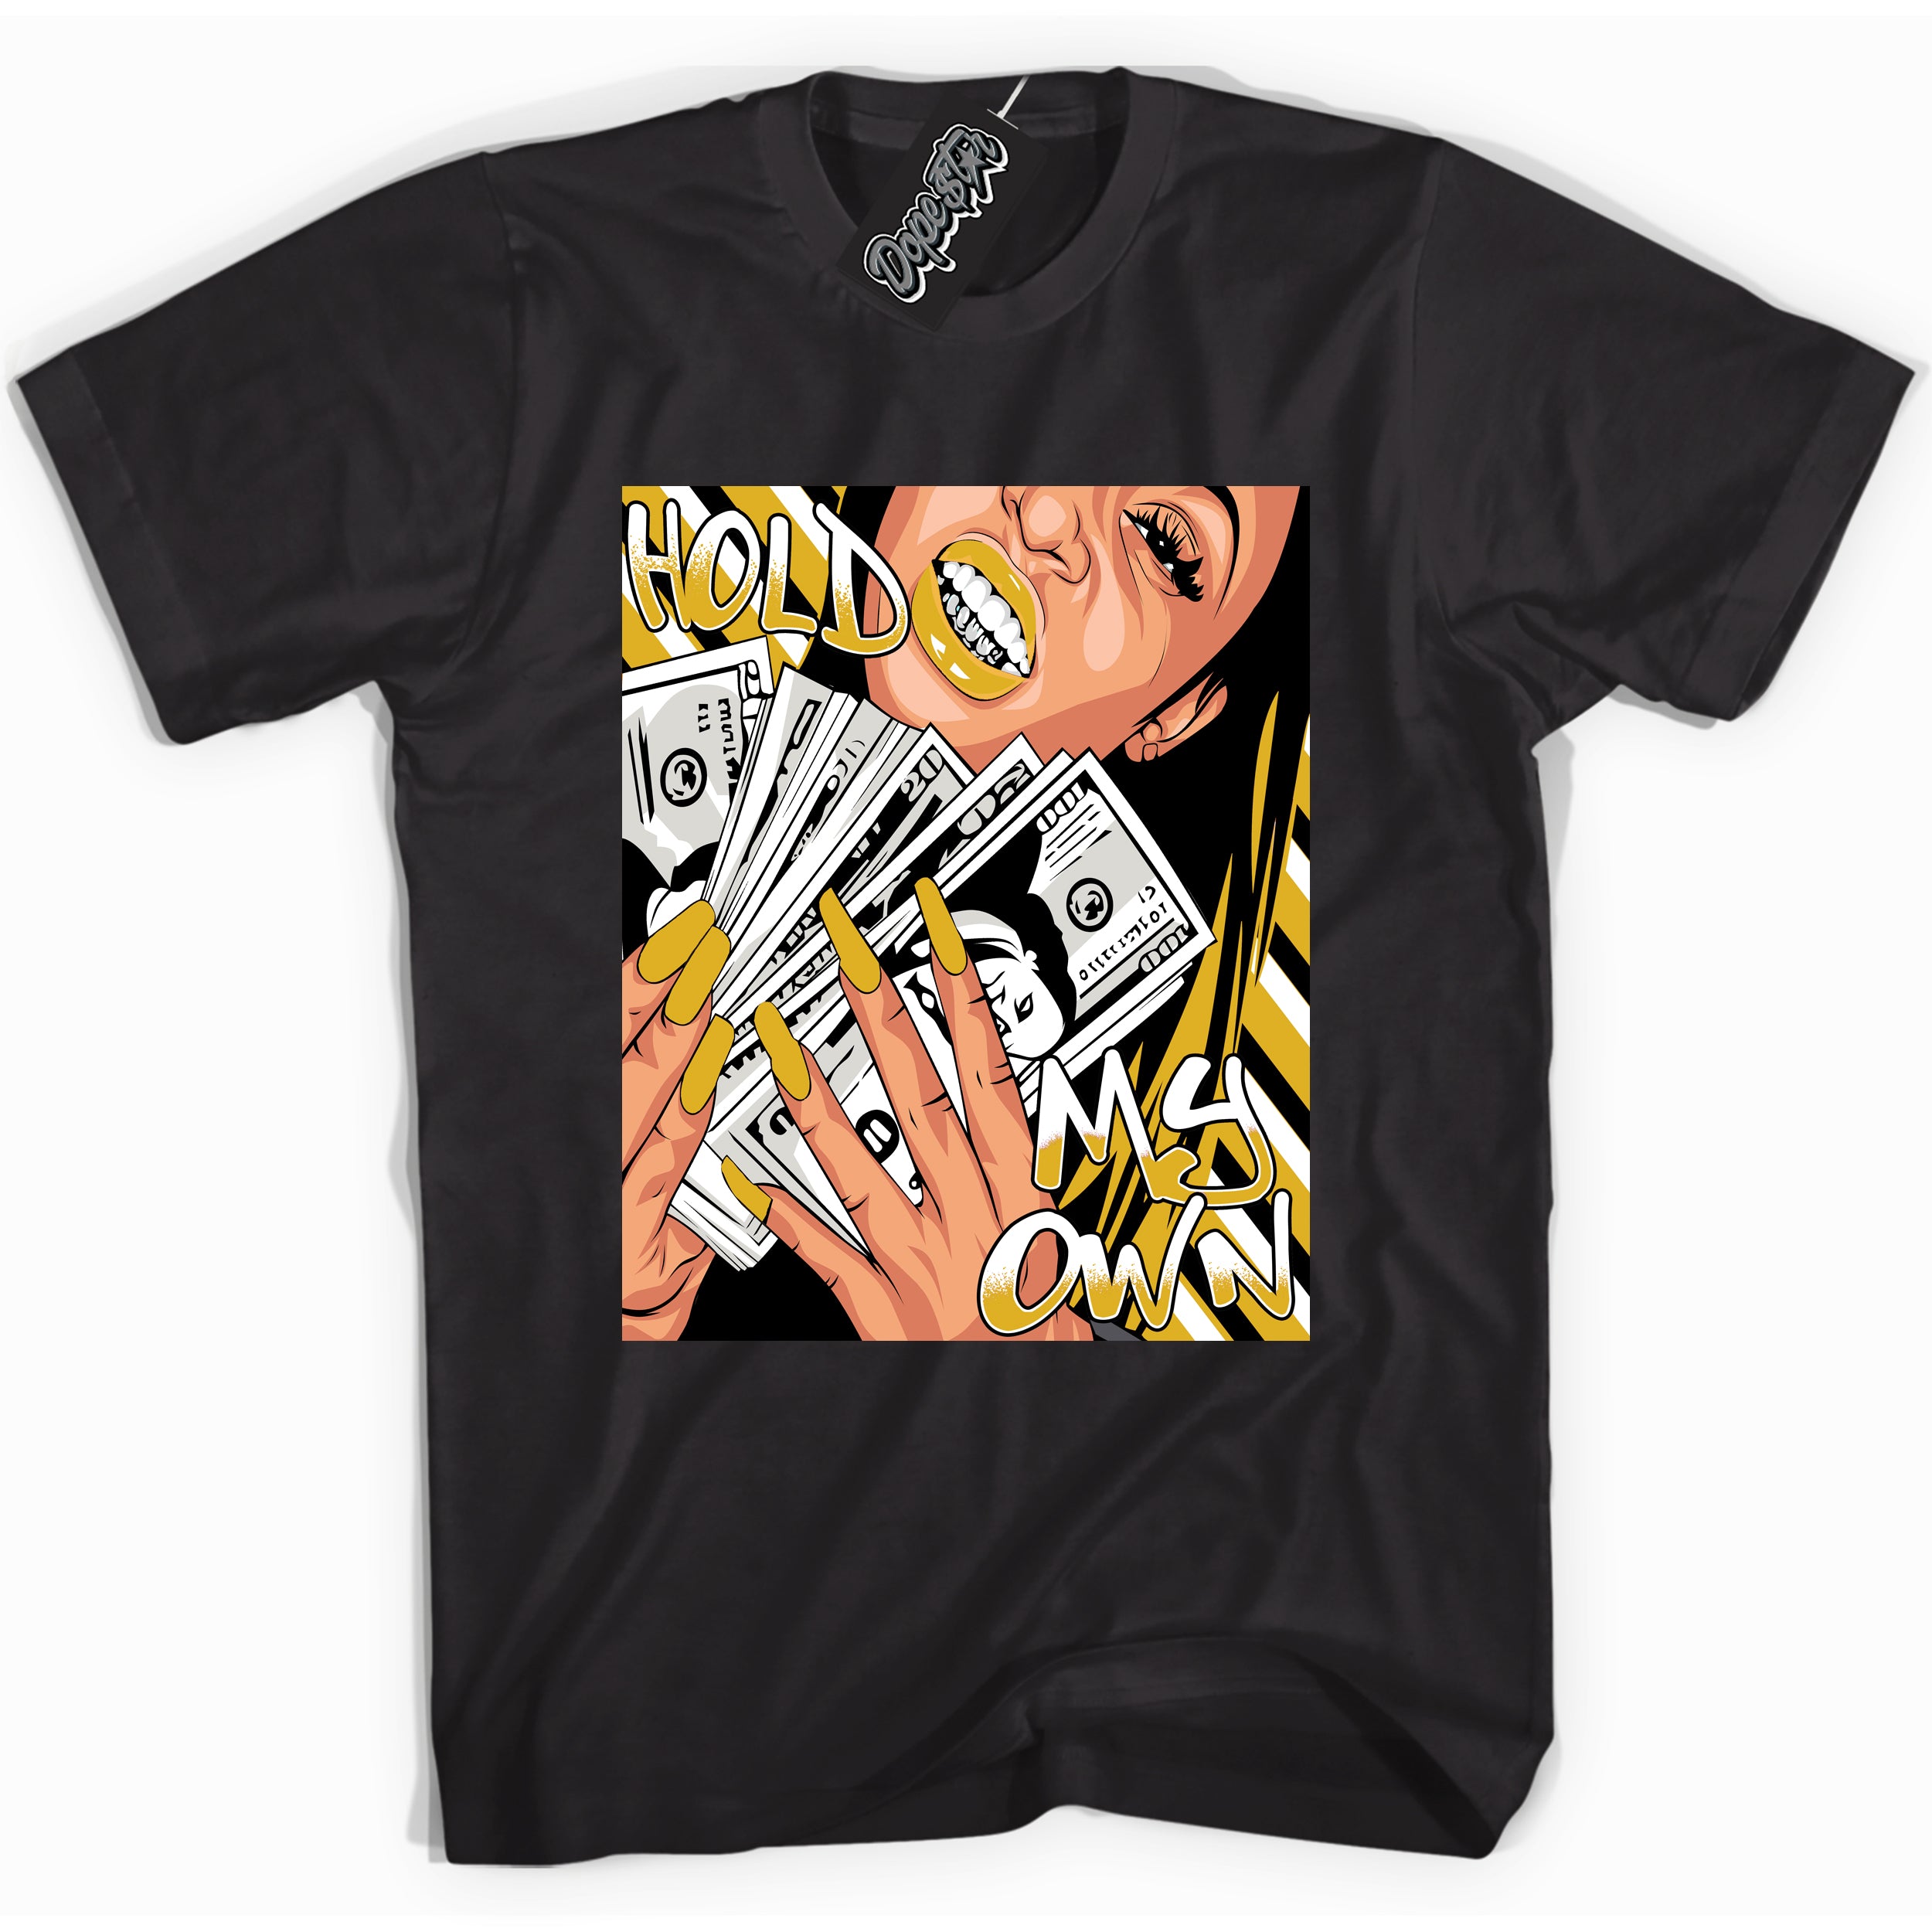 Cool Black Shirt with “ Hold My Own ” design that perfectly matches Yellow Ochre 6s Sneakers.